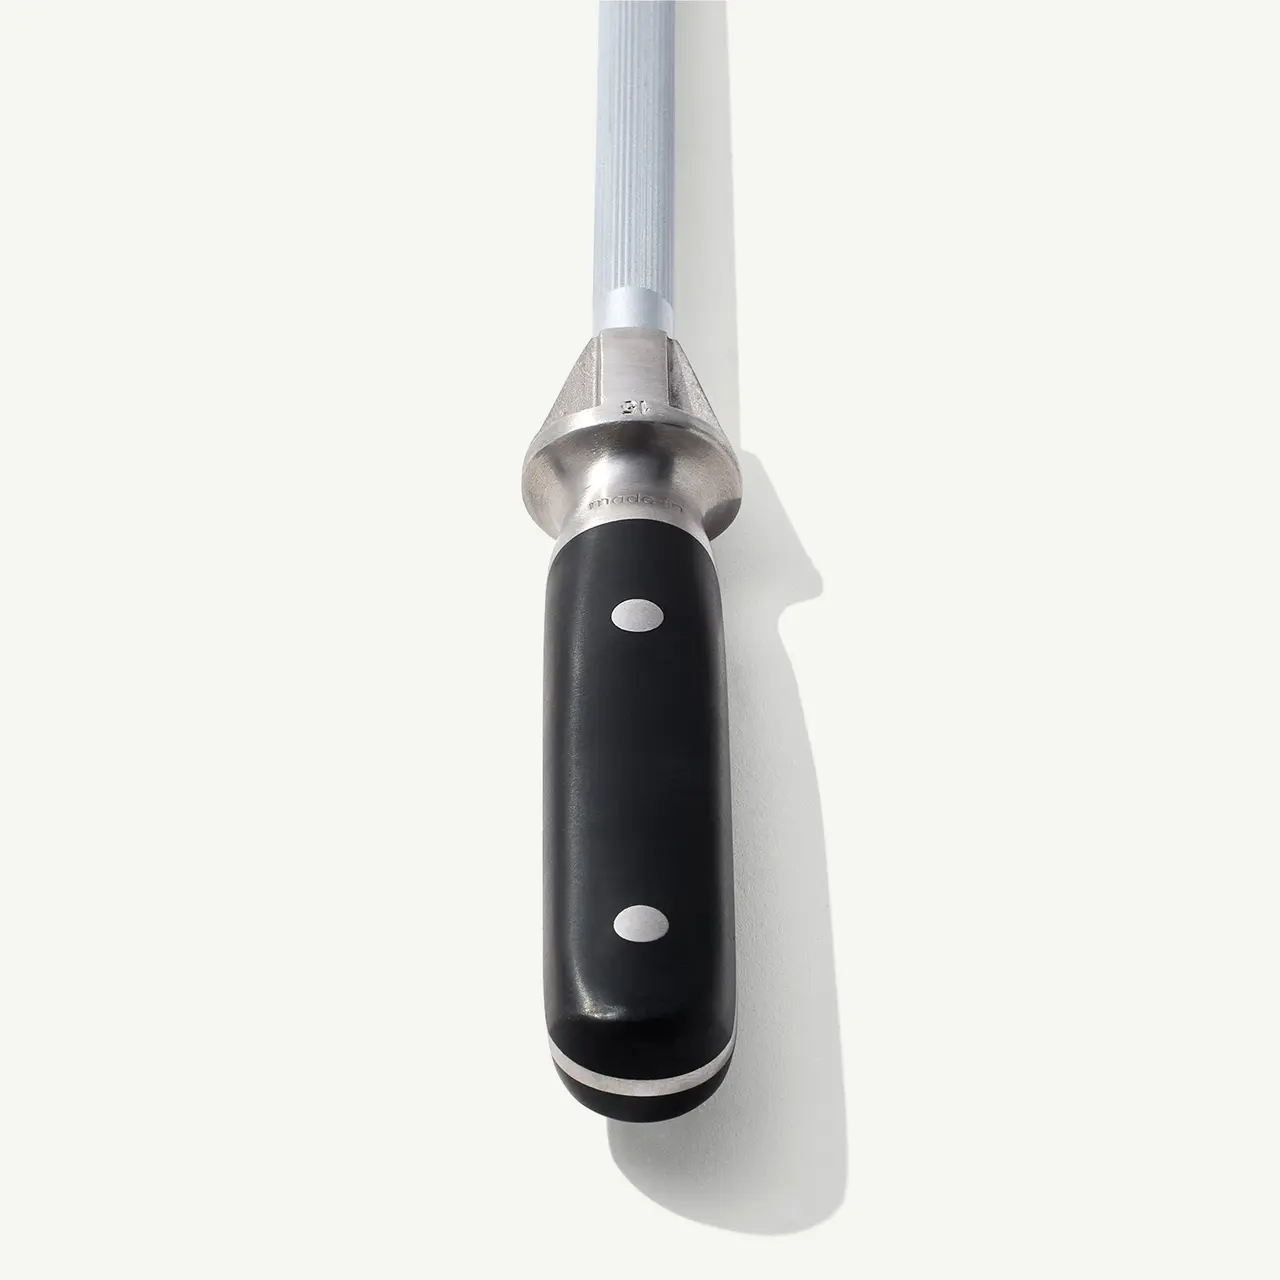 A chef's knife with a black handle is displayed on a white background, casting a soft shadow.